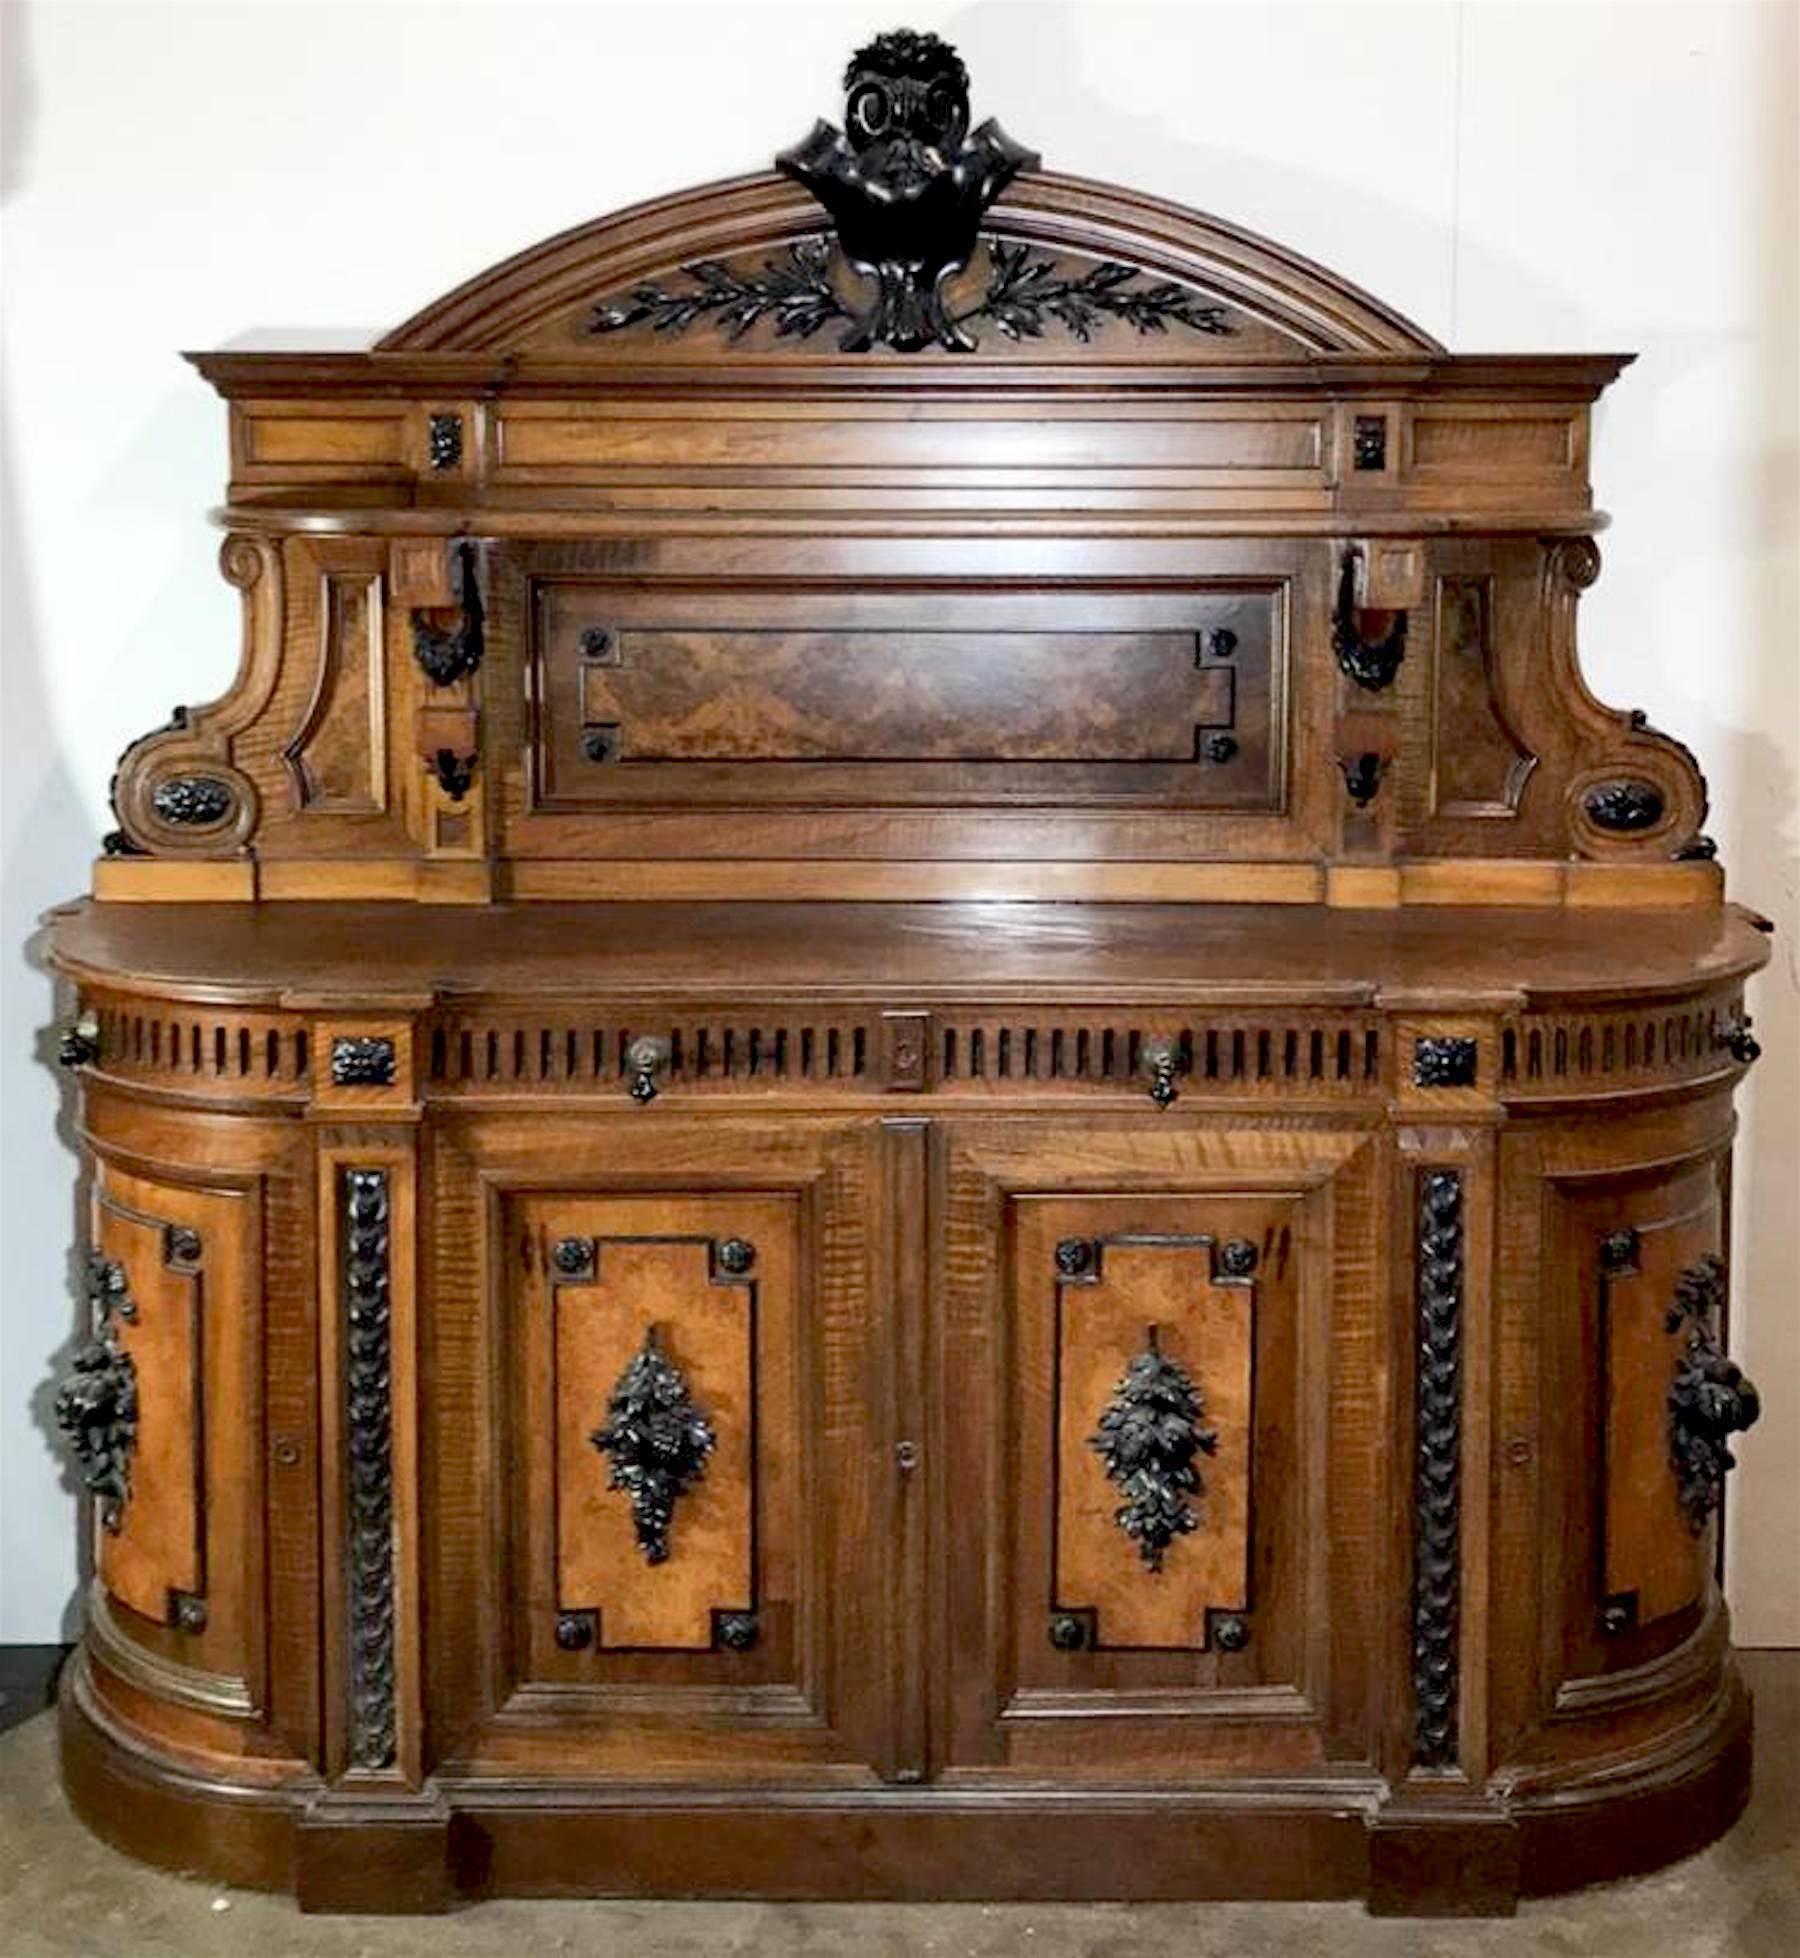 American High Victorian ebonized and burled hunt/sideboard in the style of Alexander Roux (1813-1886).